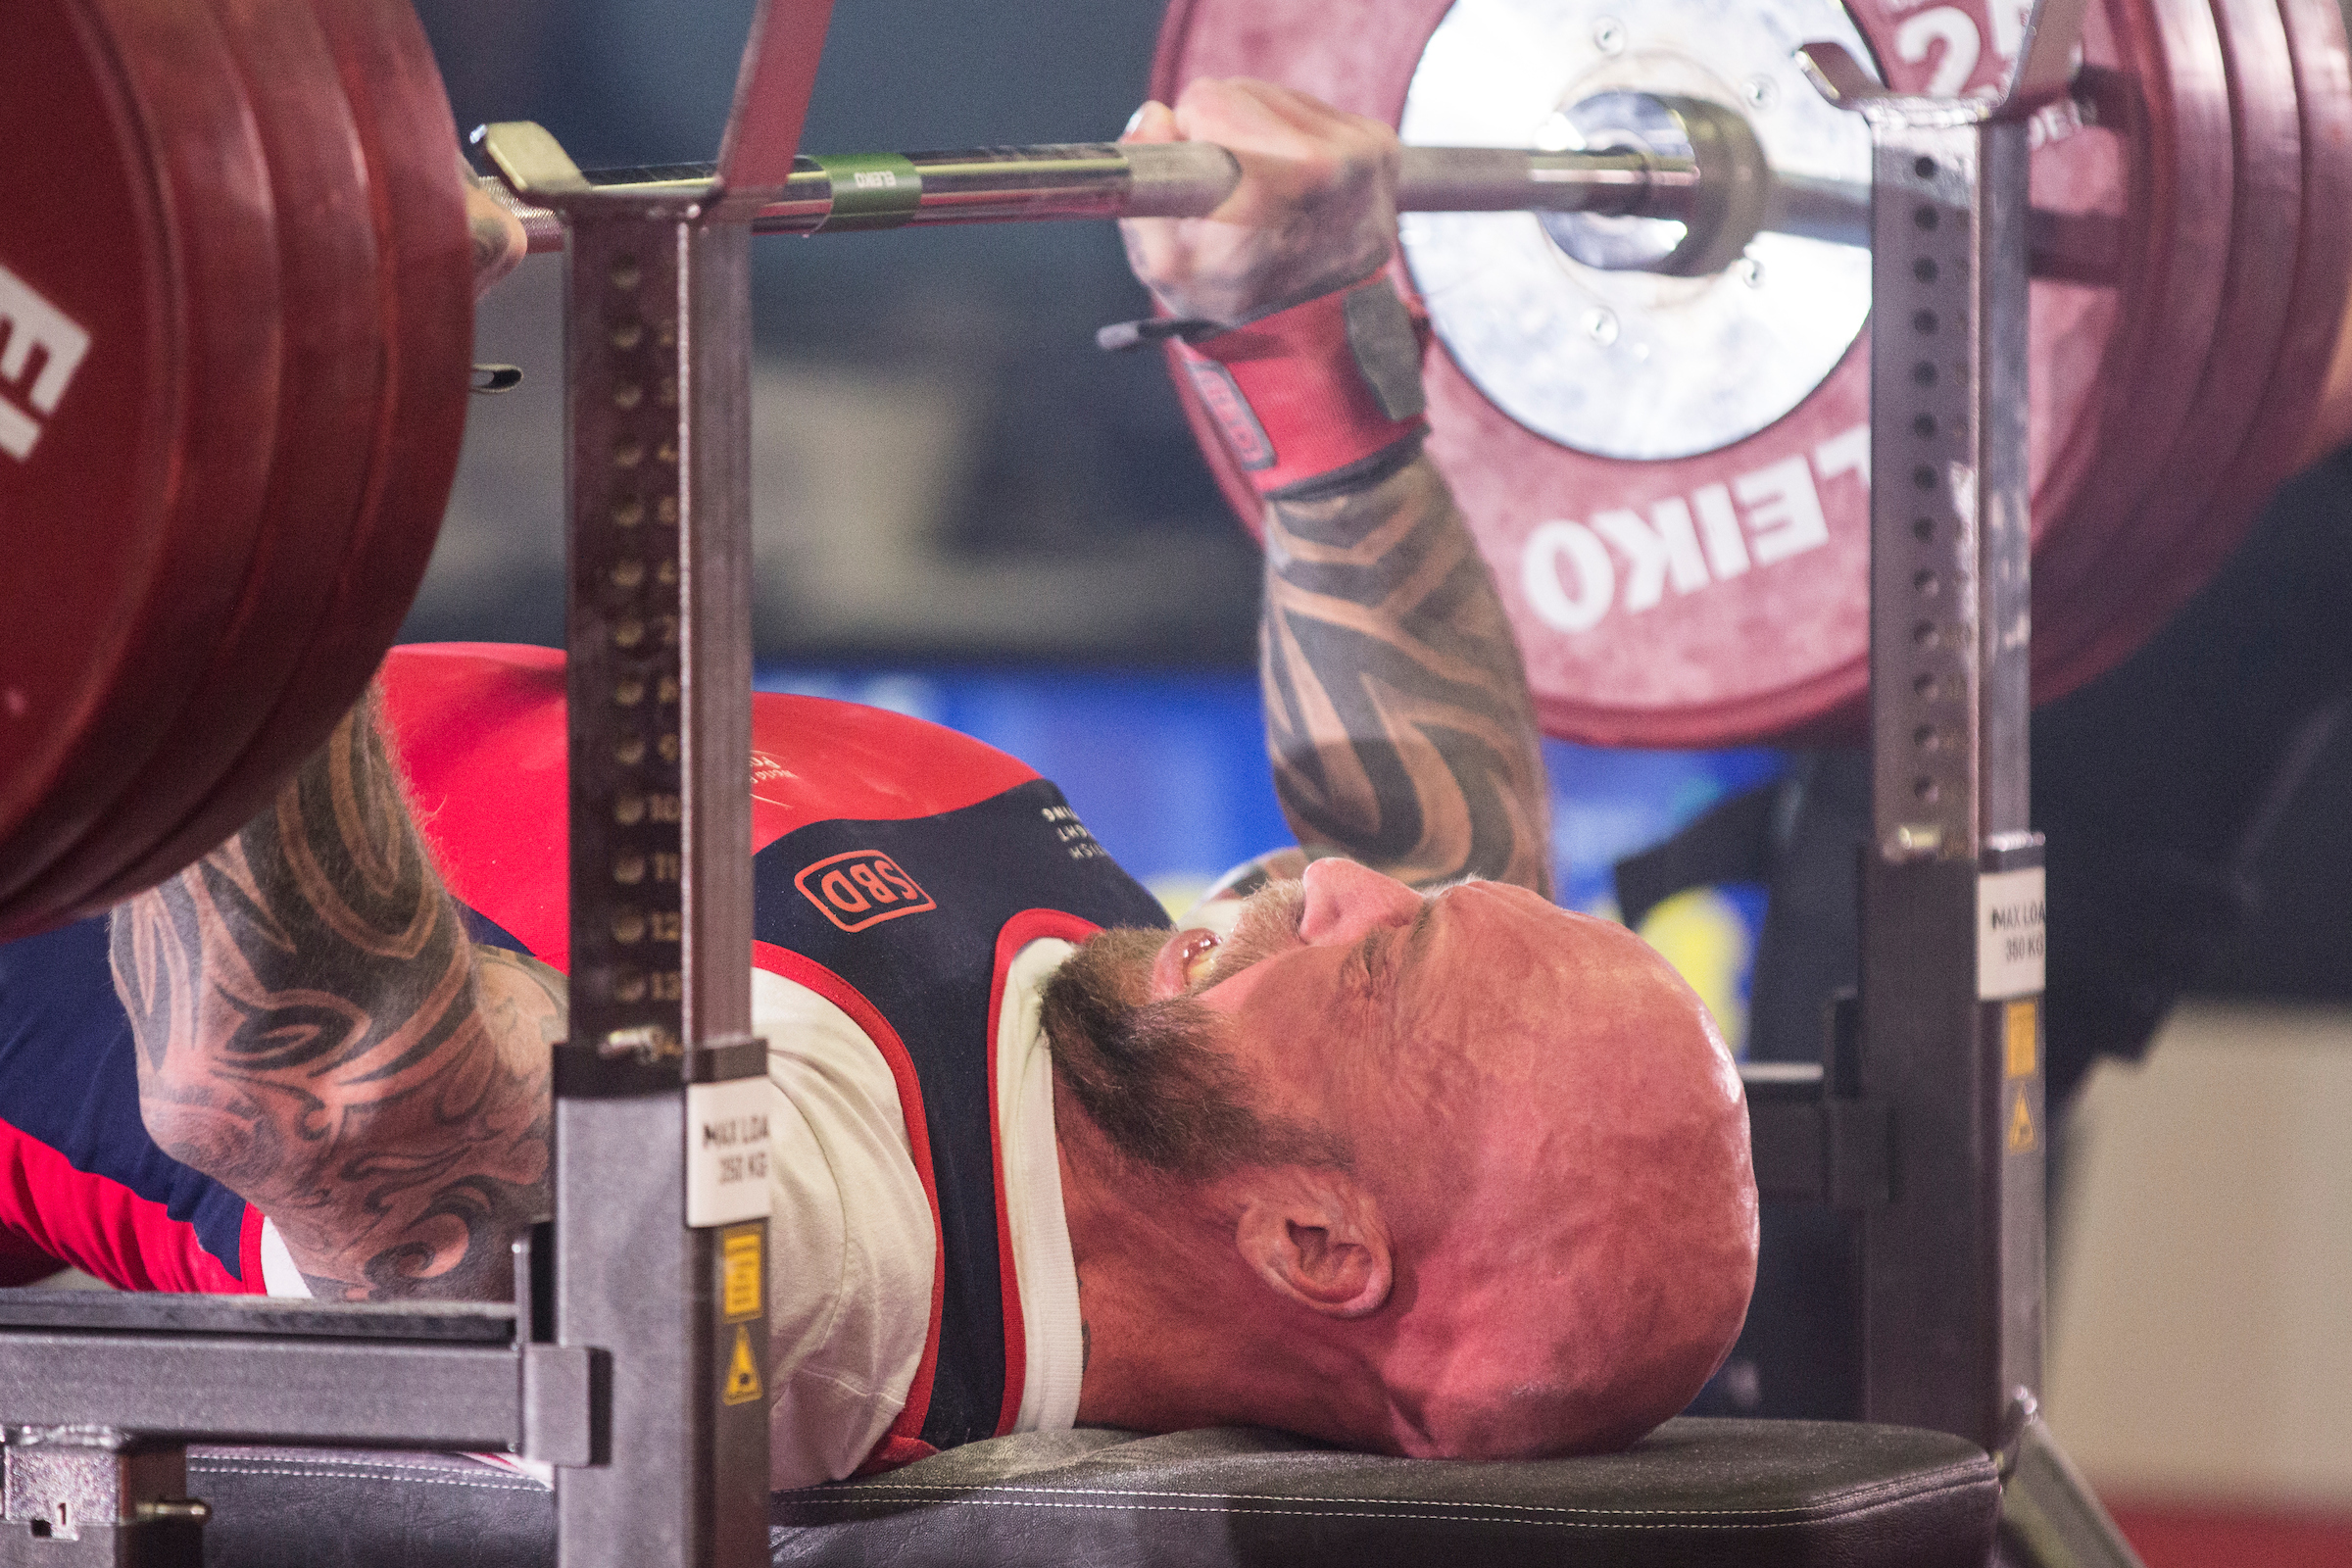 Live stream announced for Para Powerlifting World Cup